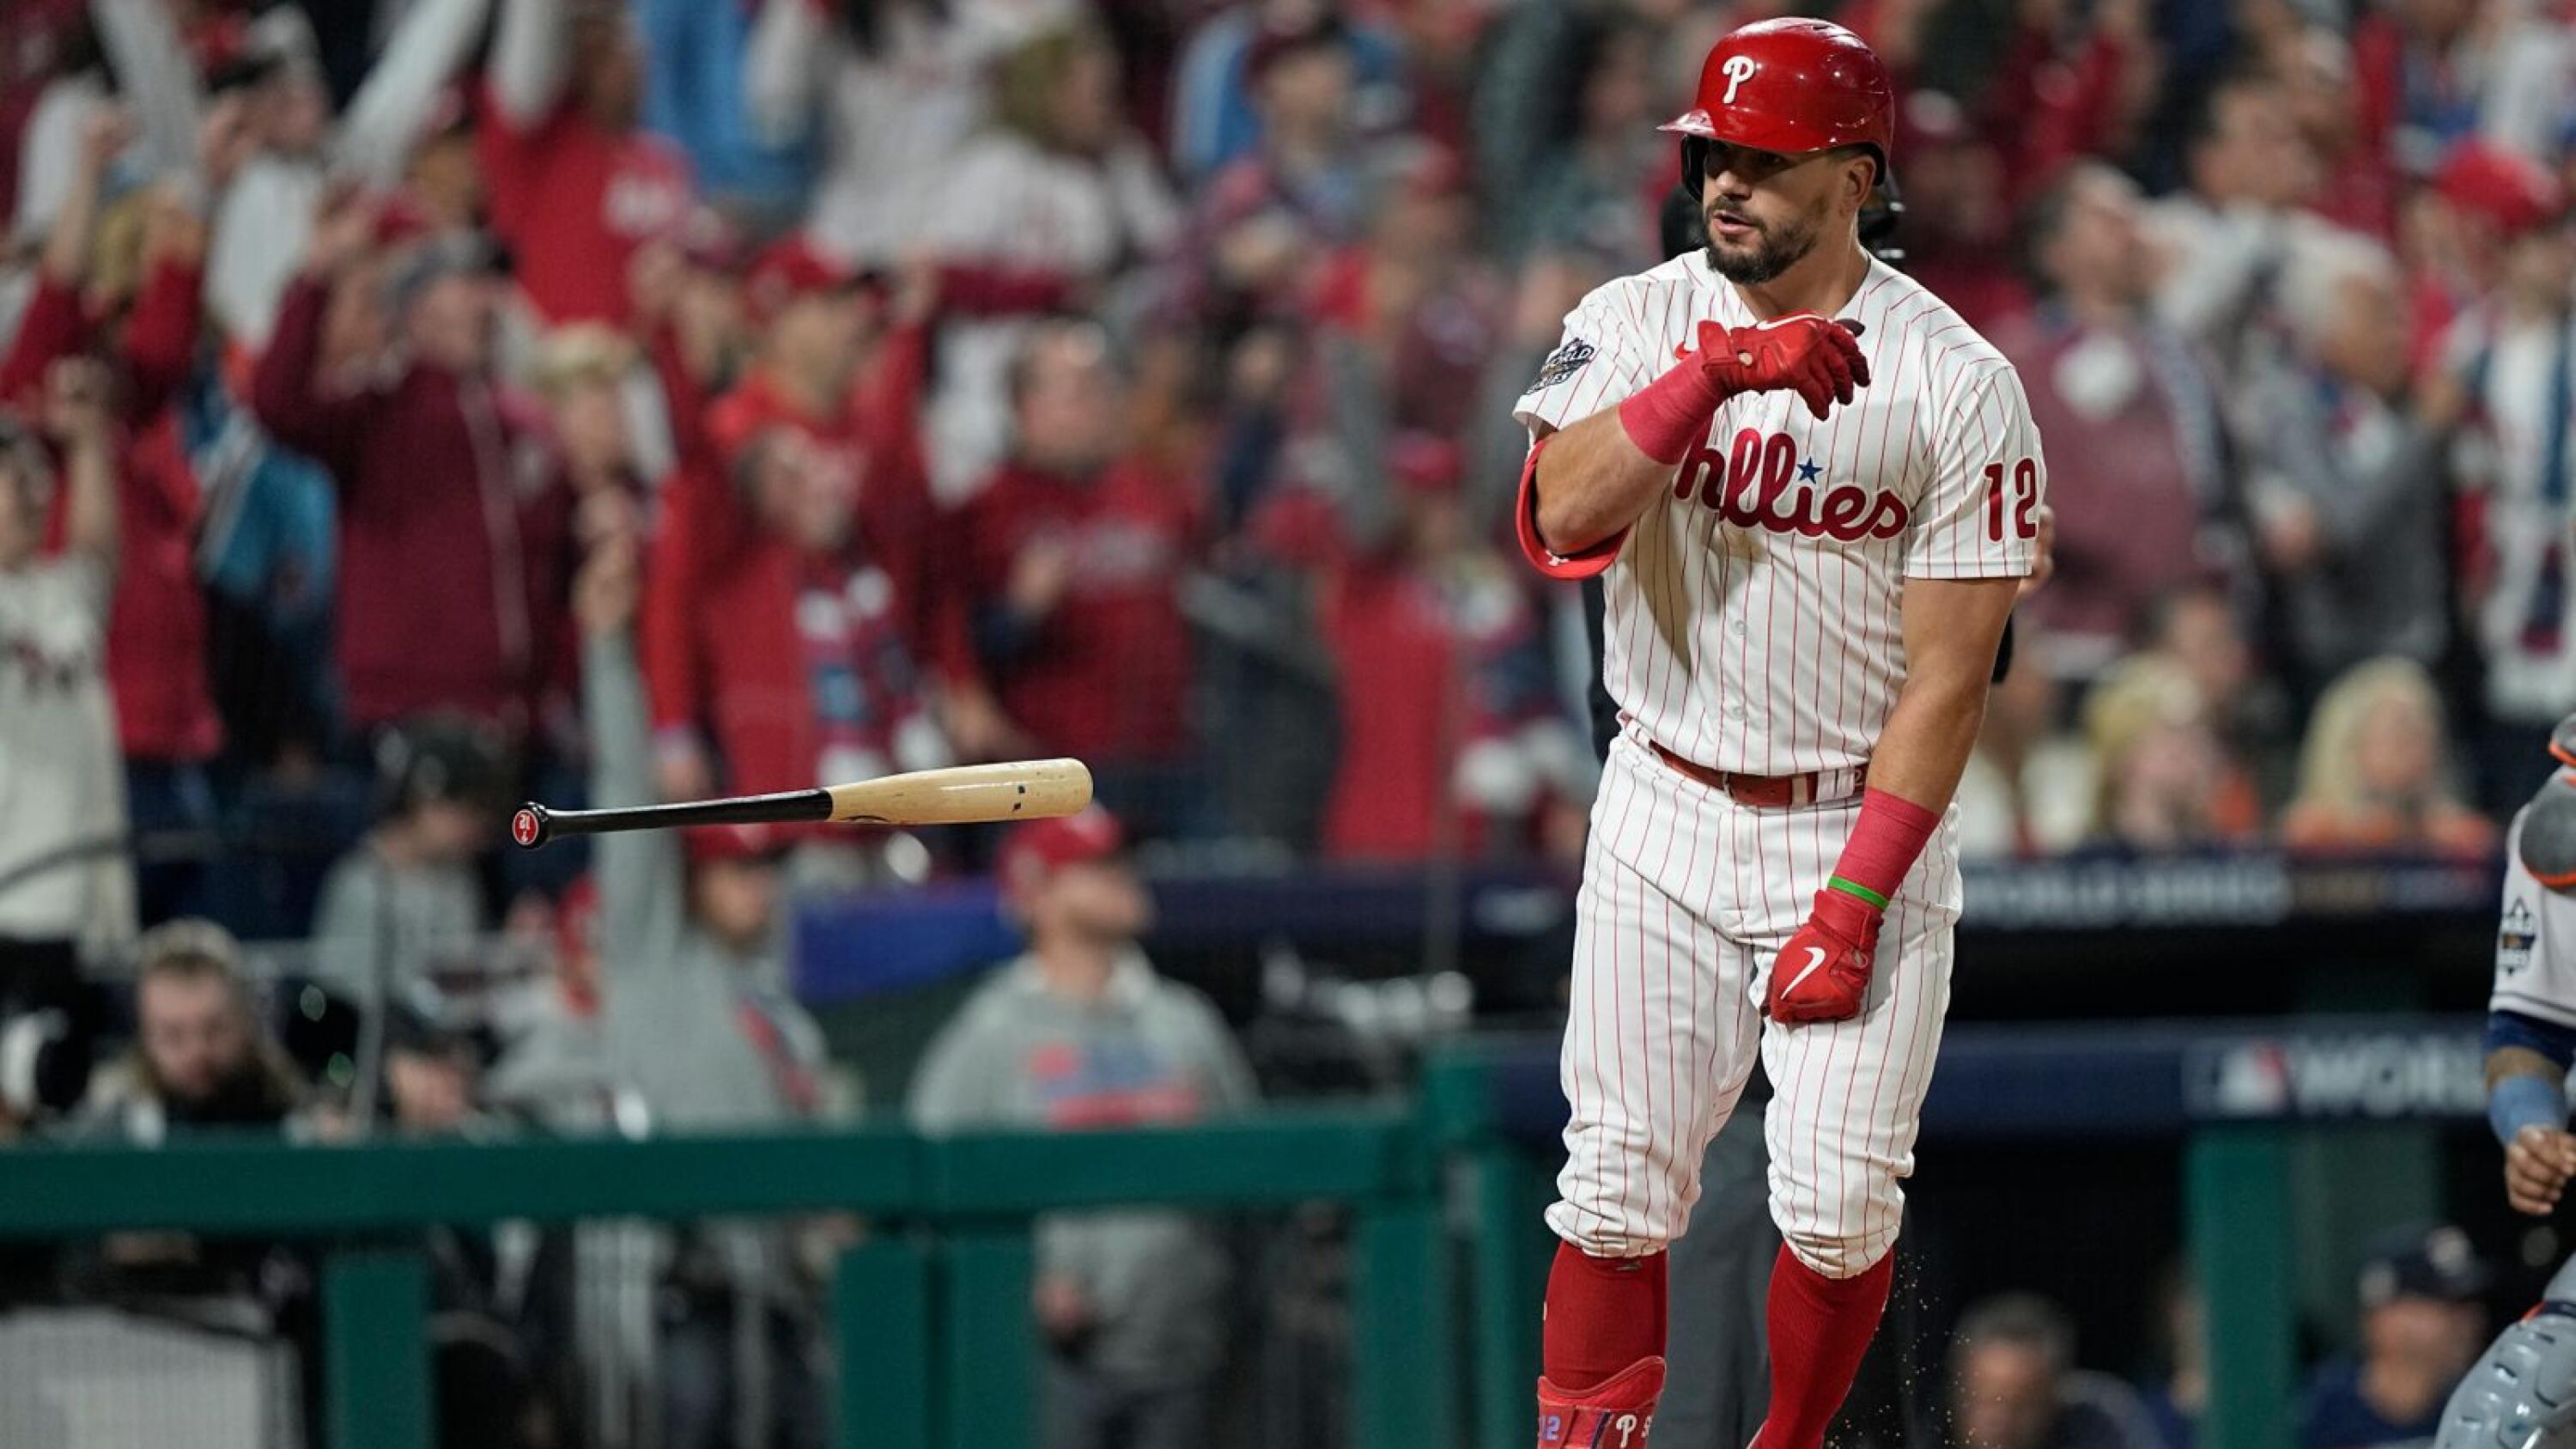 Phillies tie World Series mark with 5 HR, rout Astros in Game 3 for 2-1  series lead